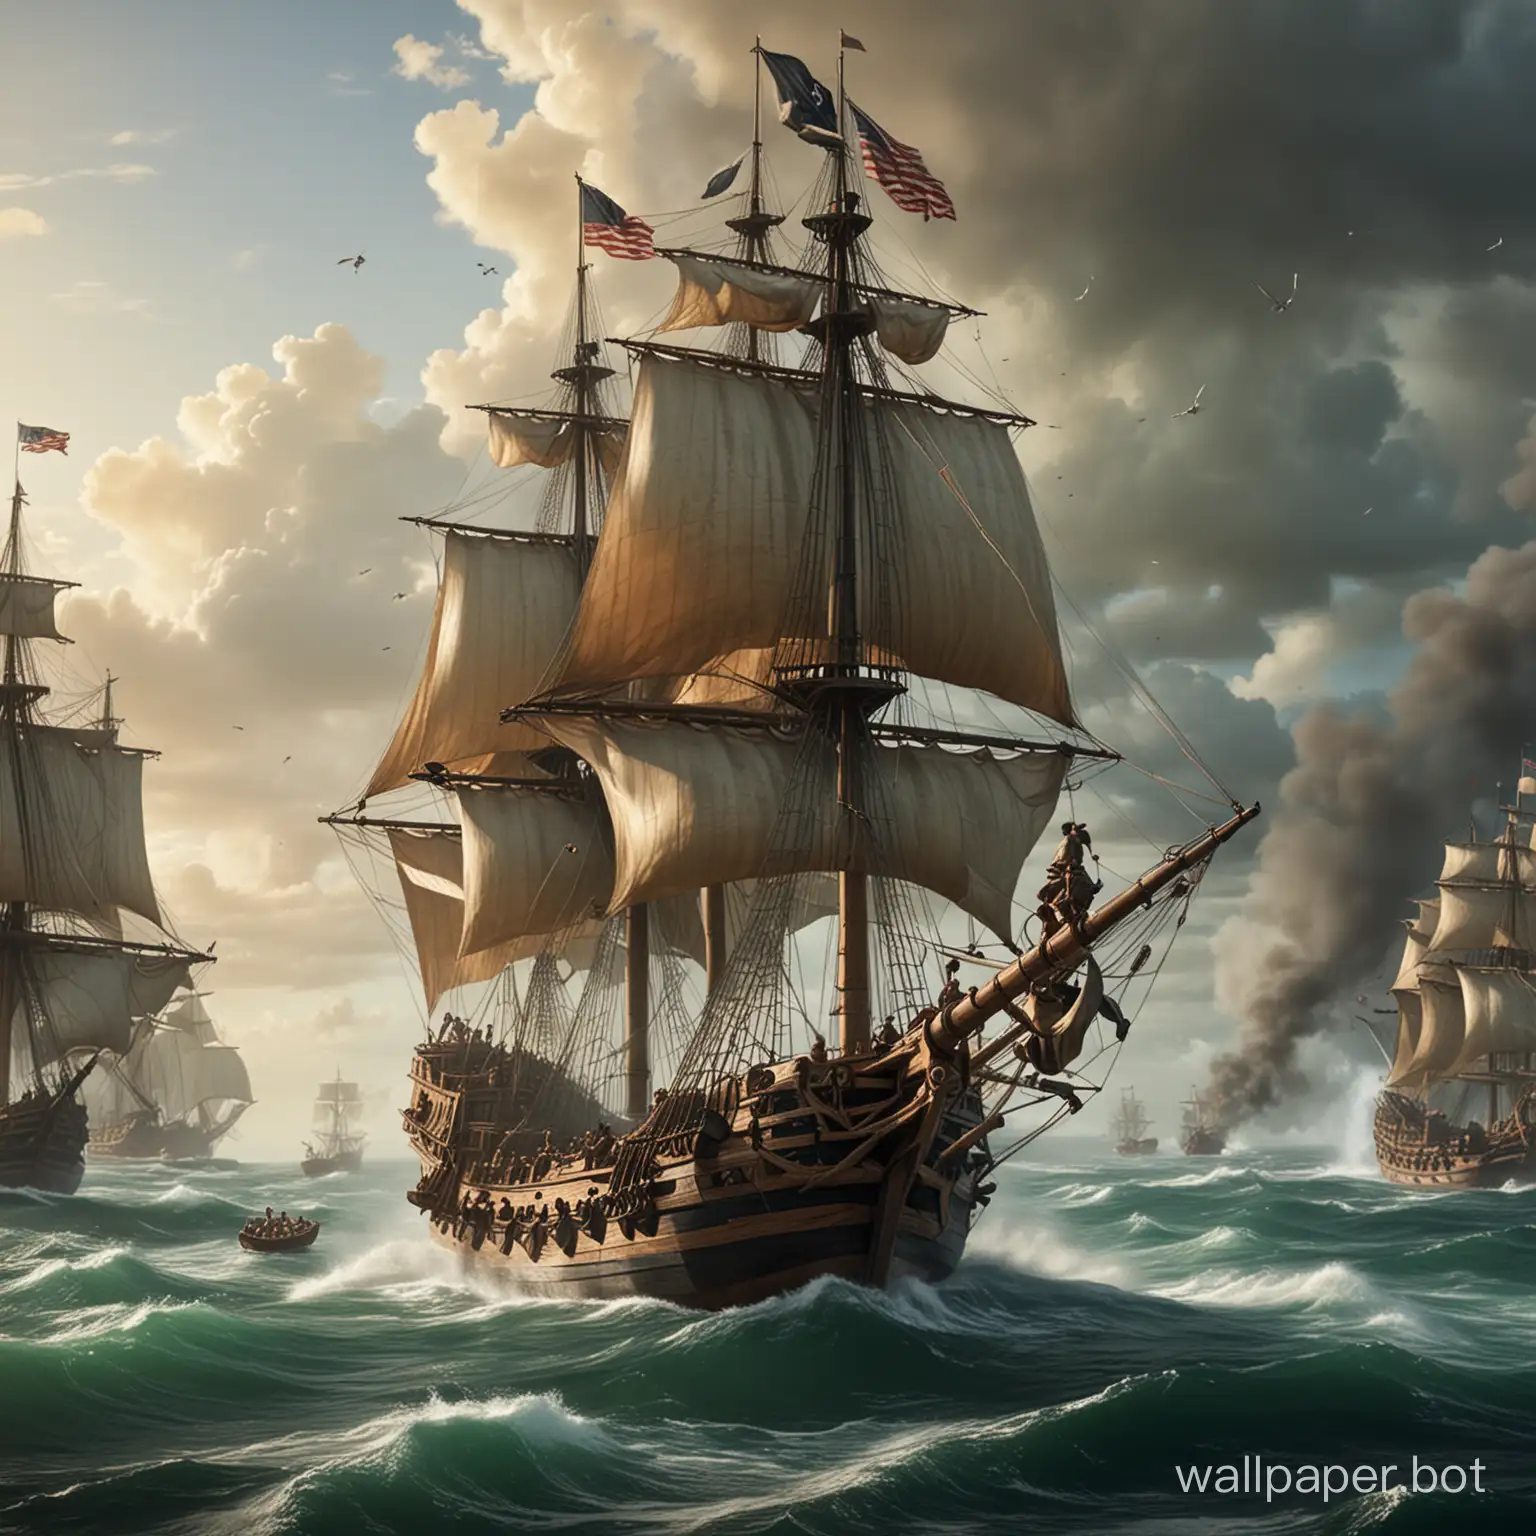 Old galleon navigating toward an island,firing cannons at another galleon, crew in the frenzy of combat